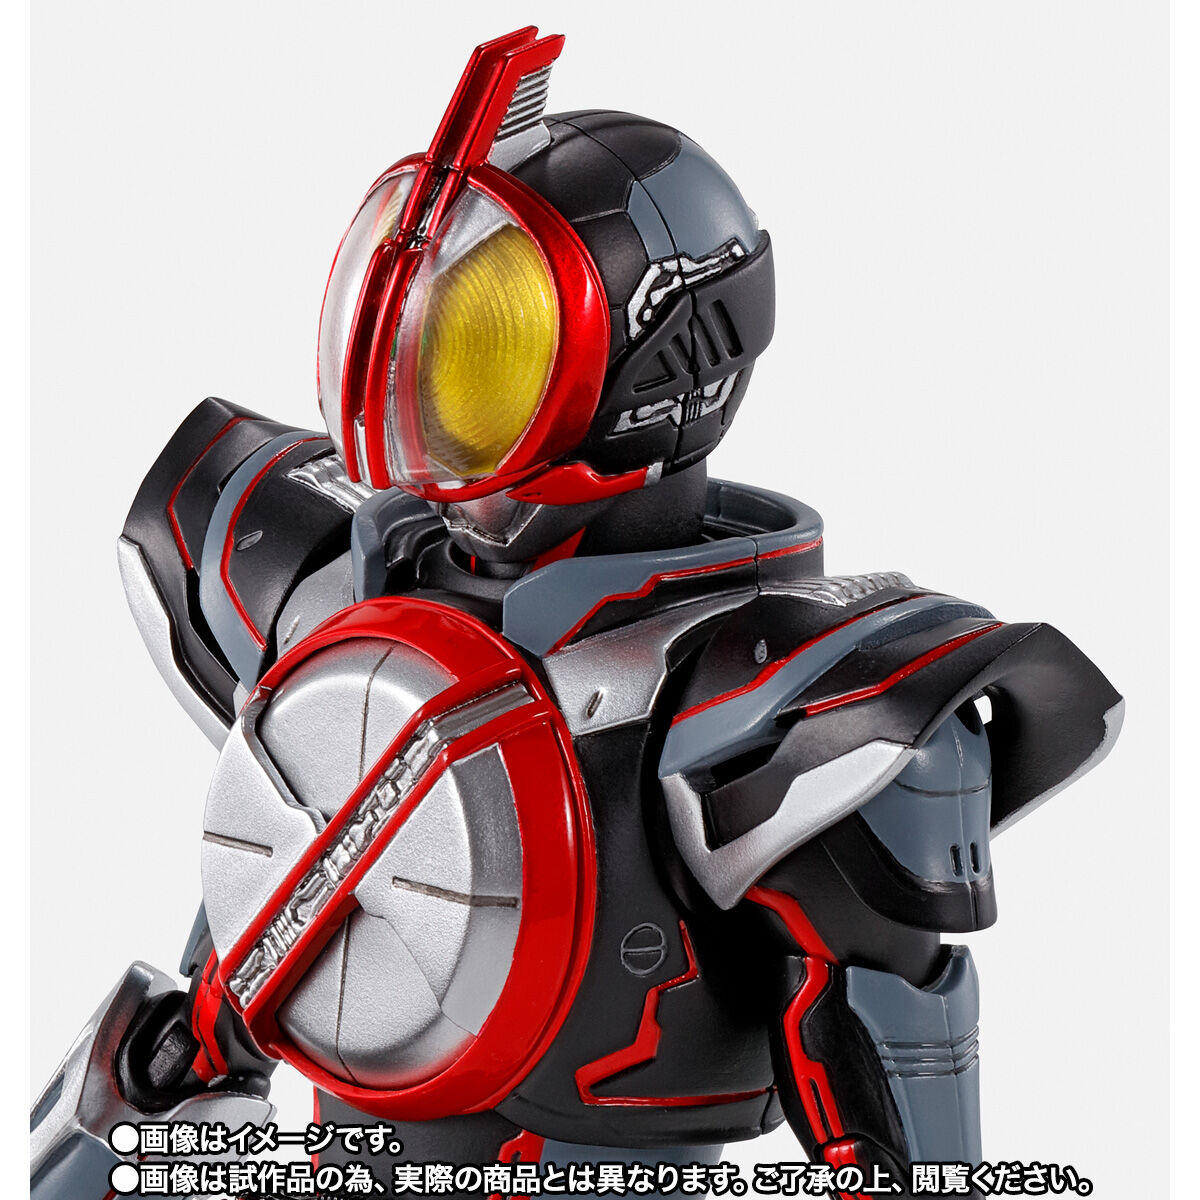 S.H.Figuarts 真骨彫製法 仮面ライダーファイズ 5個セット